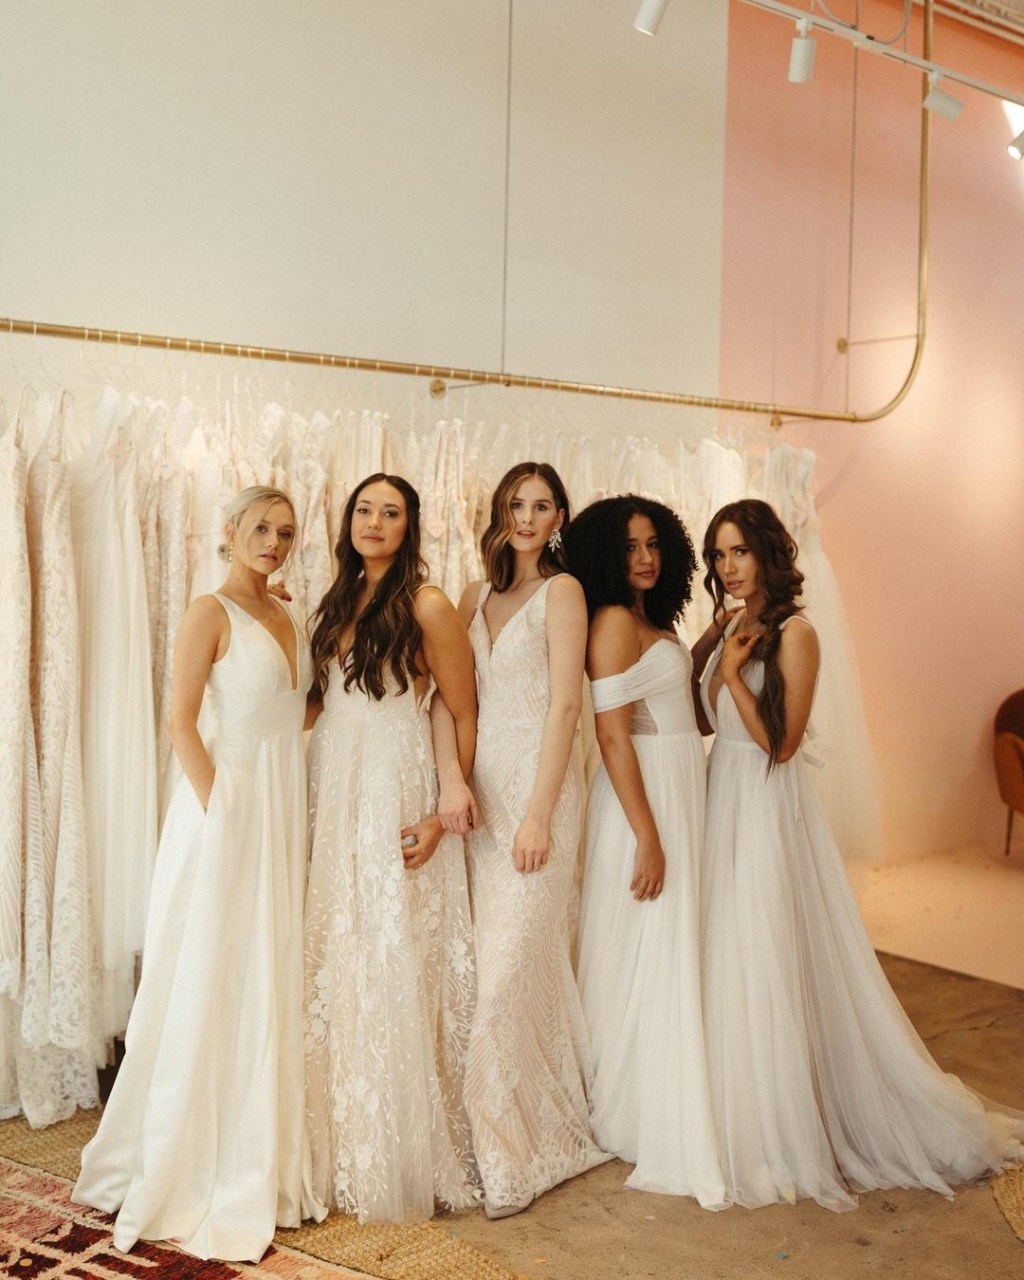 collection of wedding gowns from Vow'd